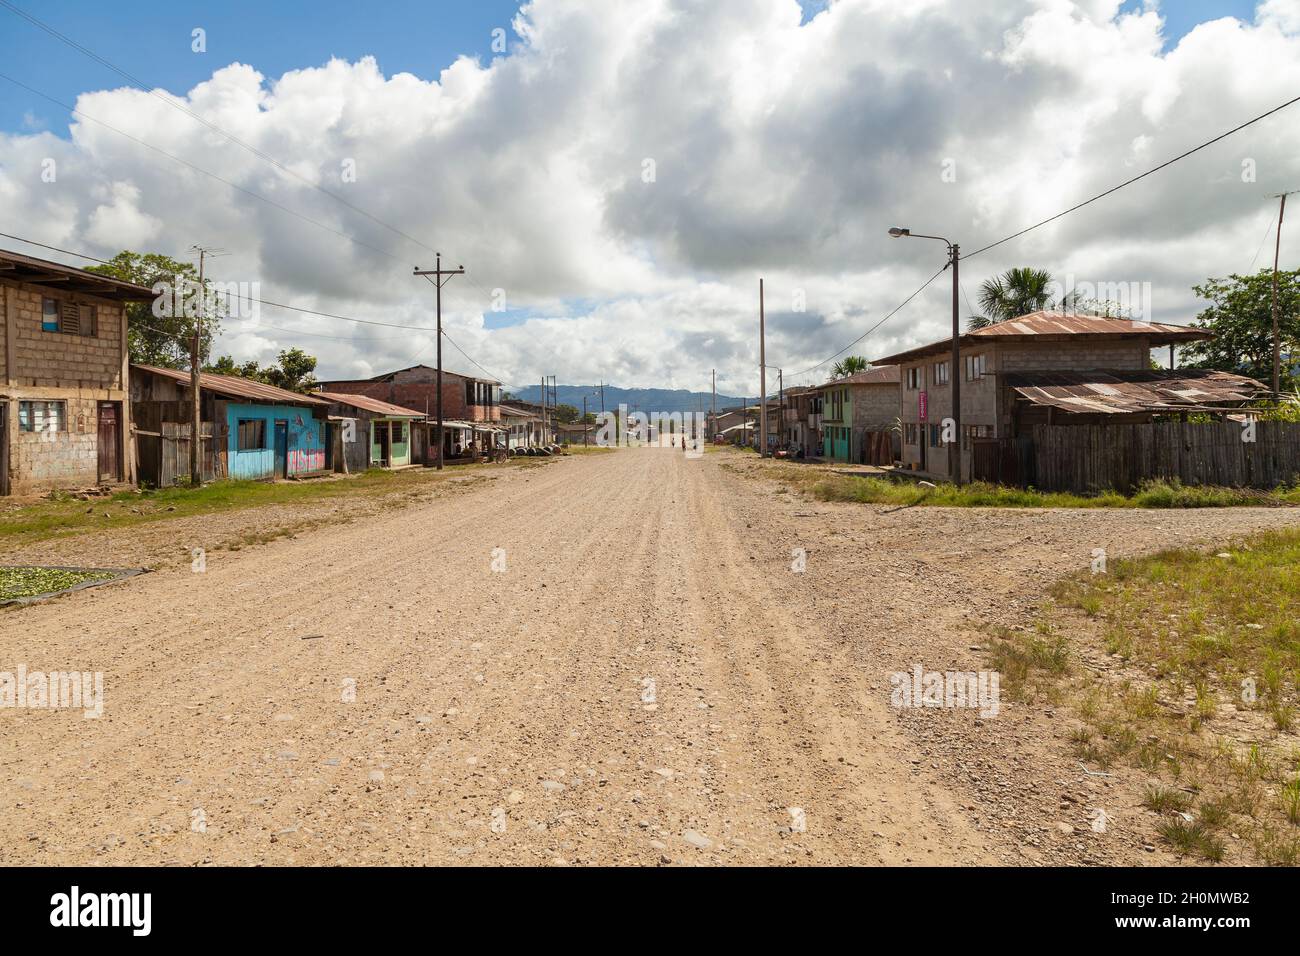 Pilcopata, Peru - April 12, 2014: Several houses in one of the neighborhoods of the small town of Pilcopata, line a dirt street Stock Photo